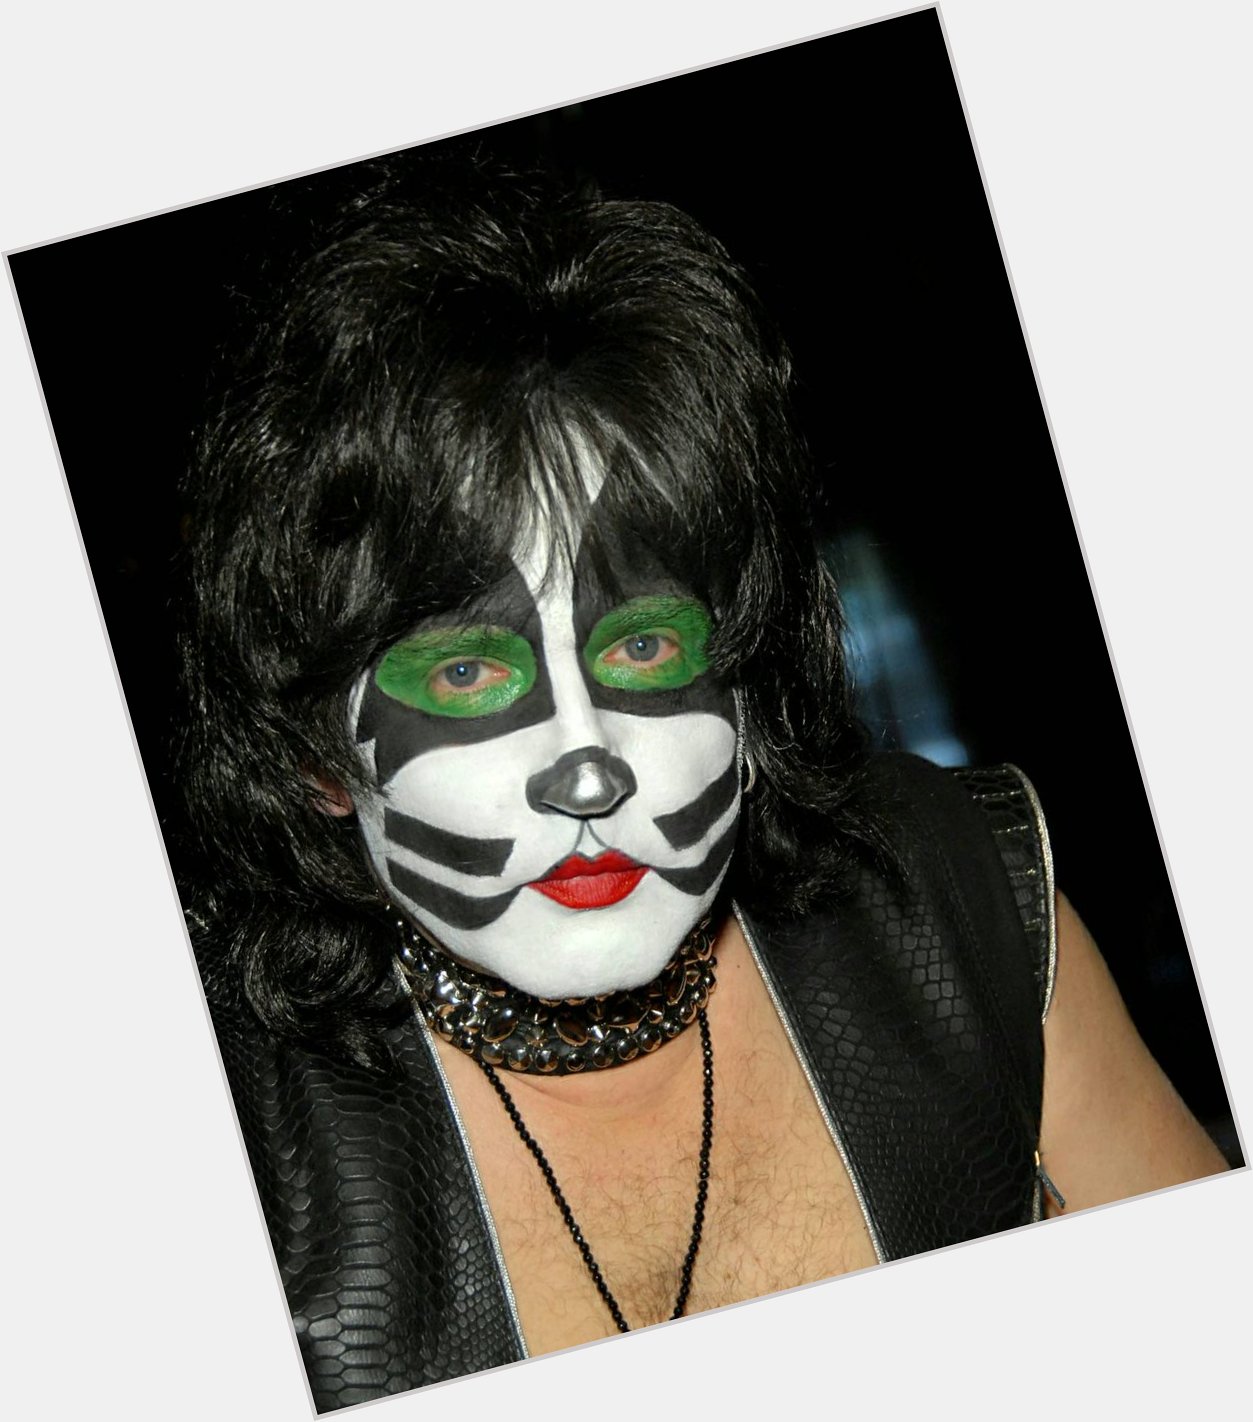 Happy Birthday Eric Singer KISS drummer/Catman from 1991! Born on this day in 1958! 